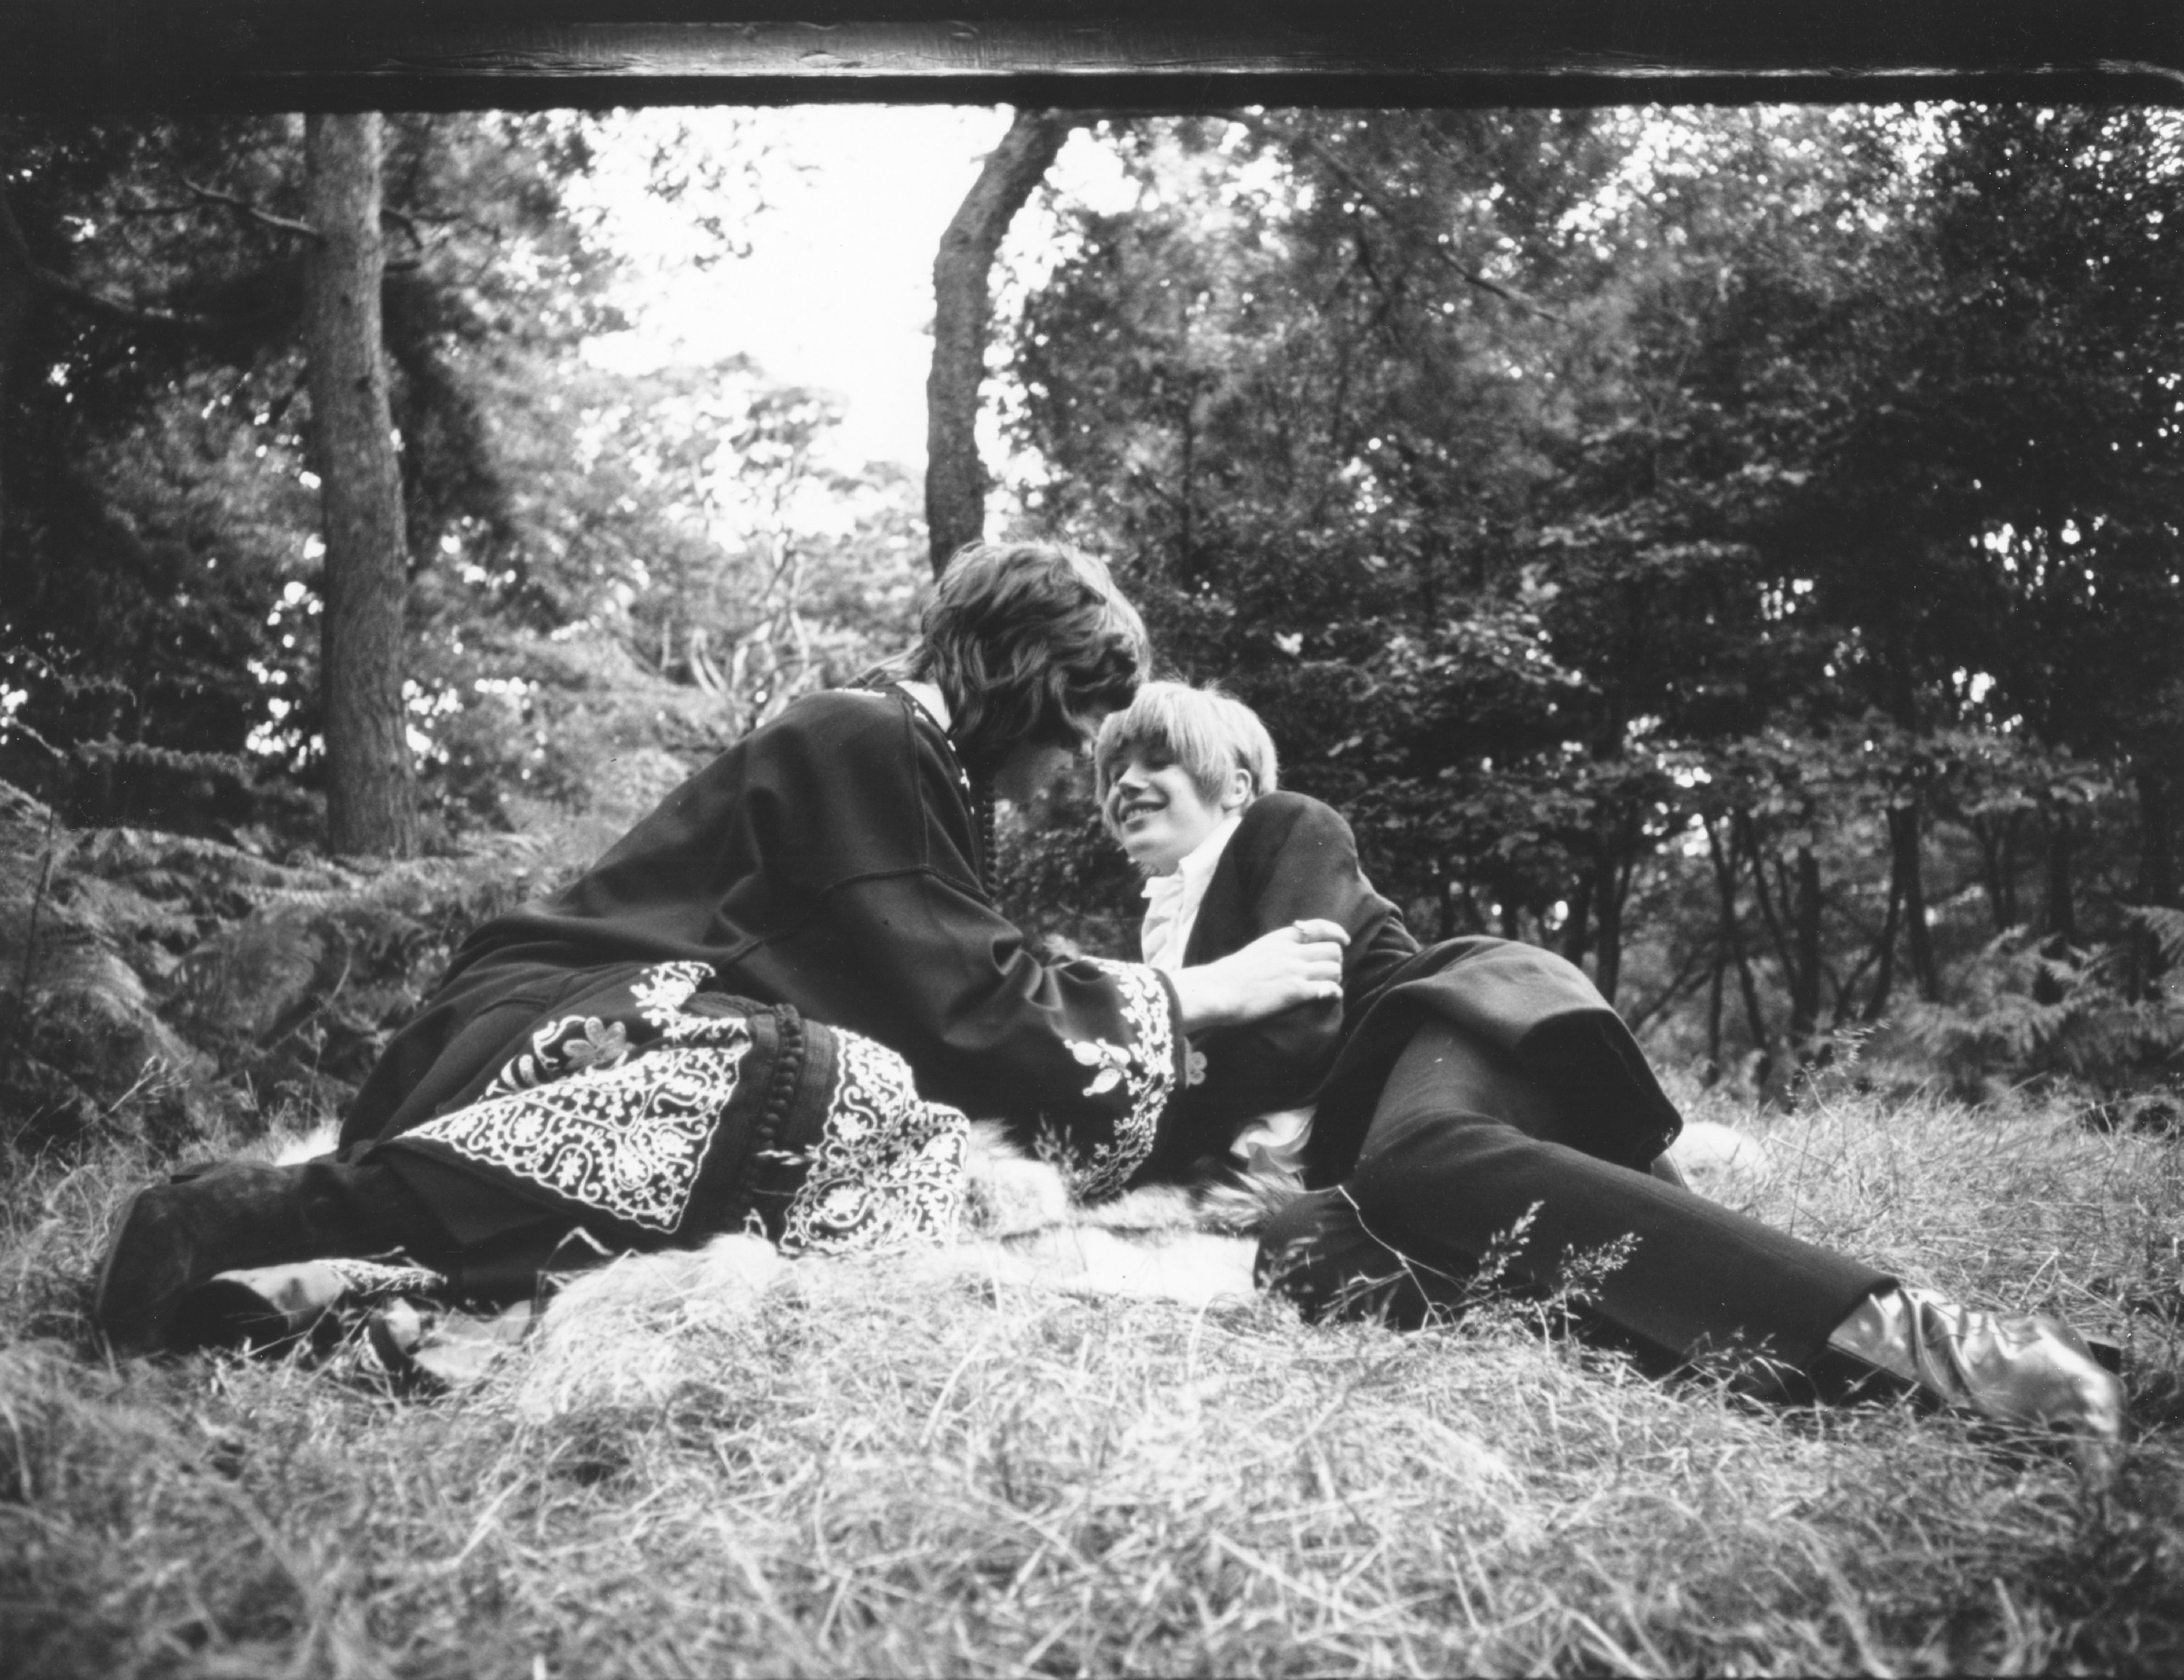 Mick Jagger and Marianne Faithfull lying in hay